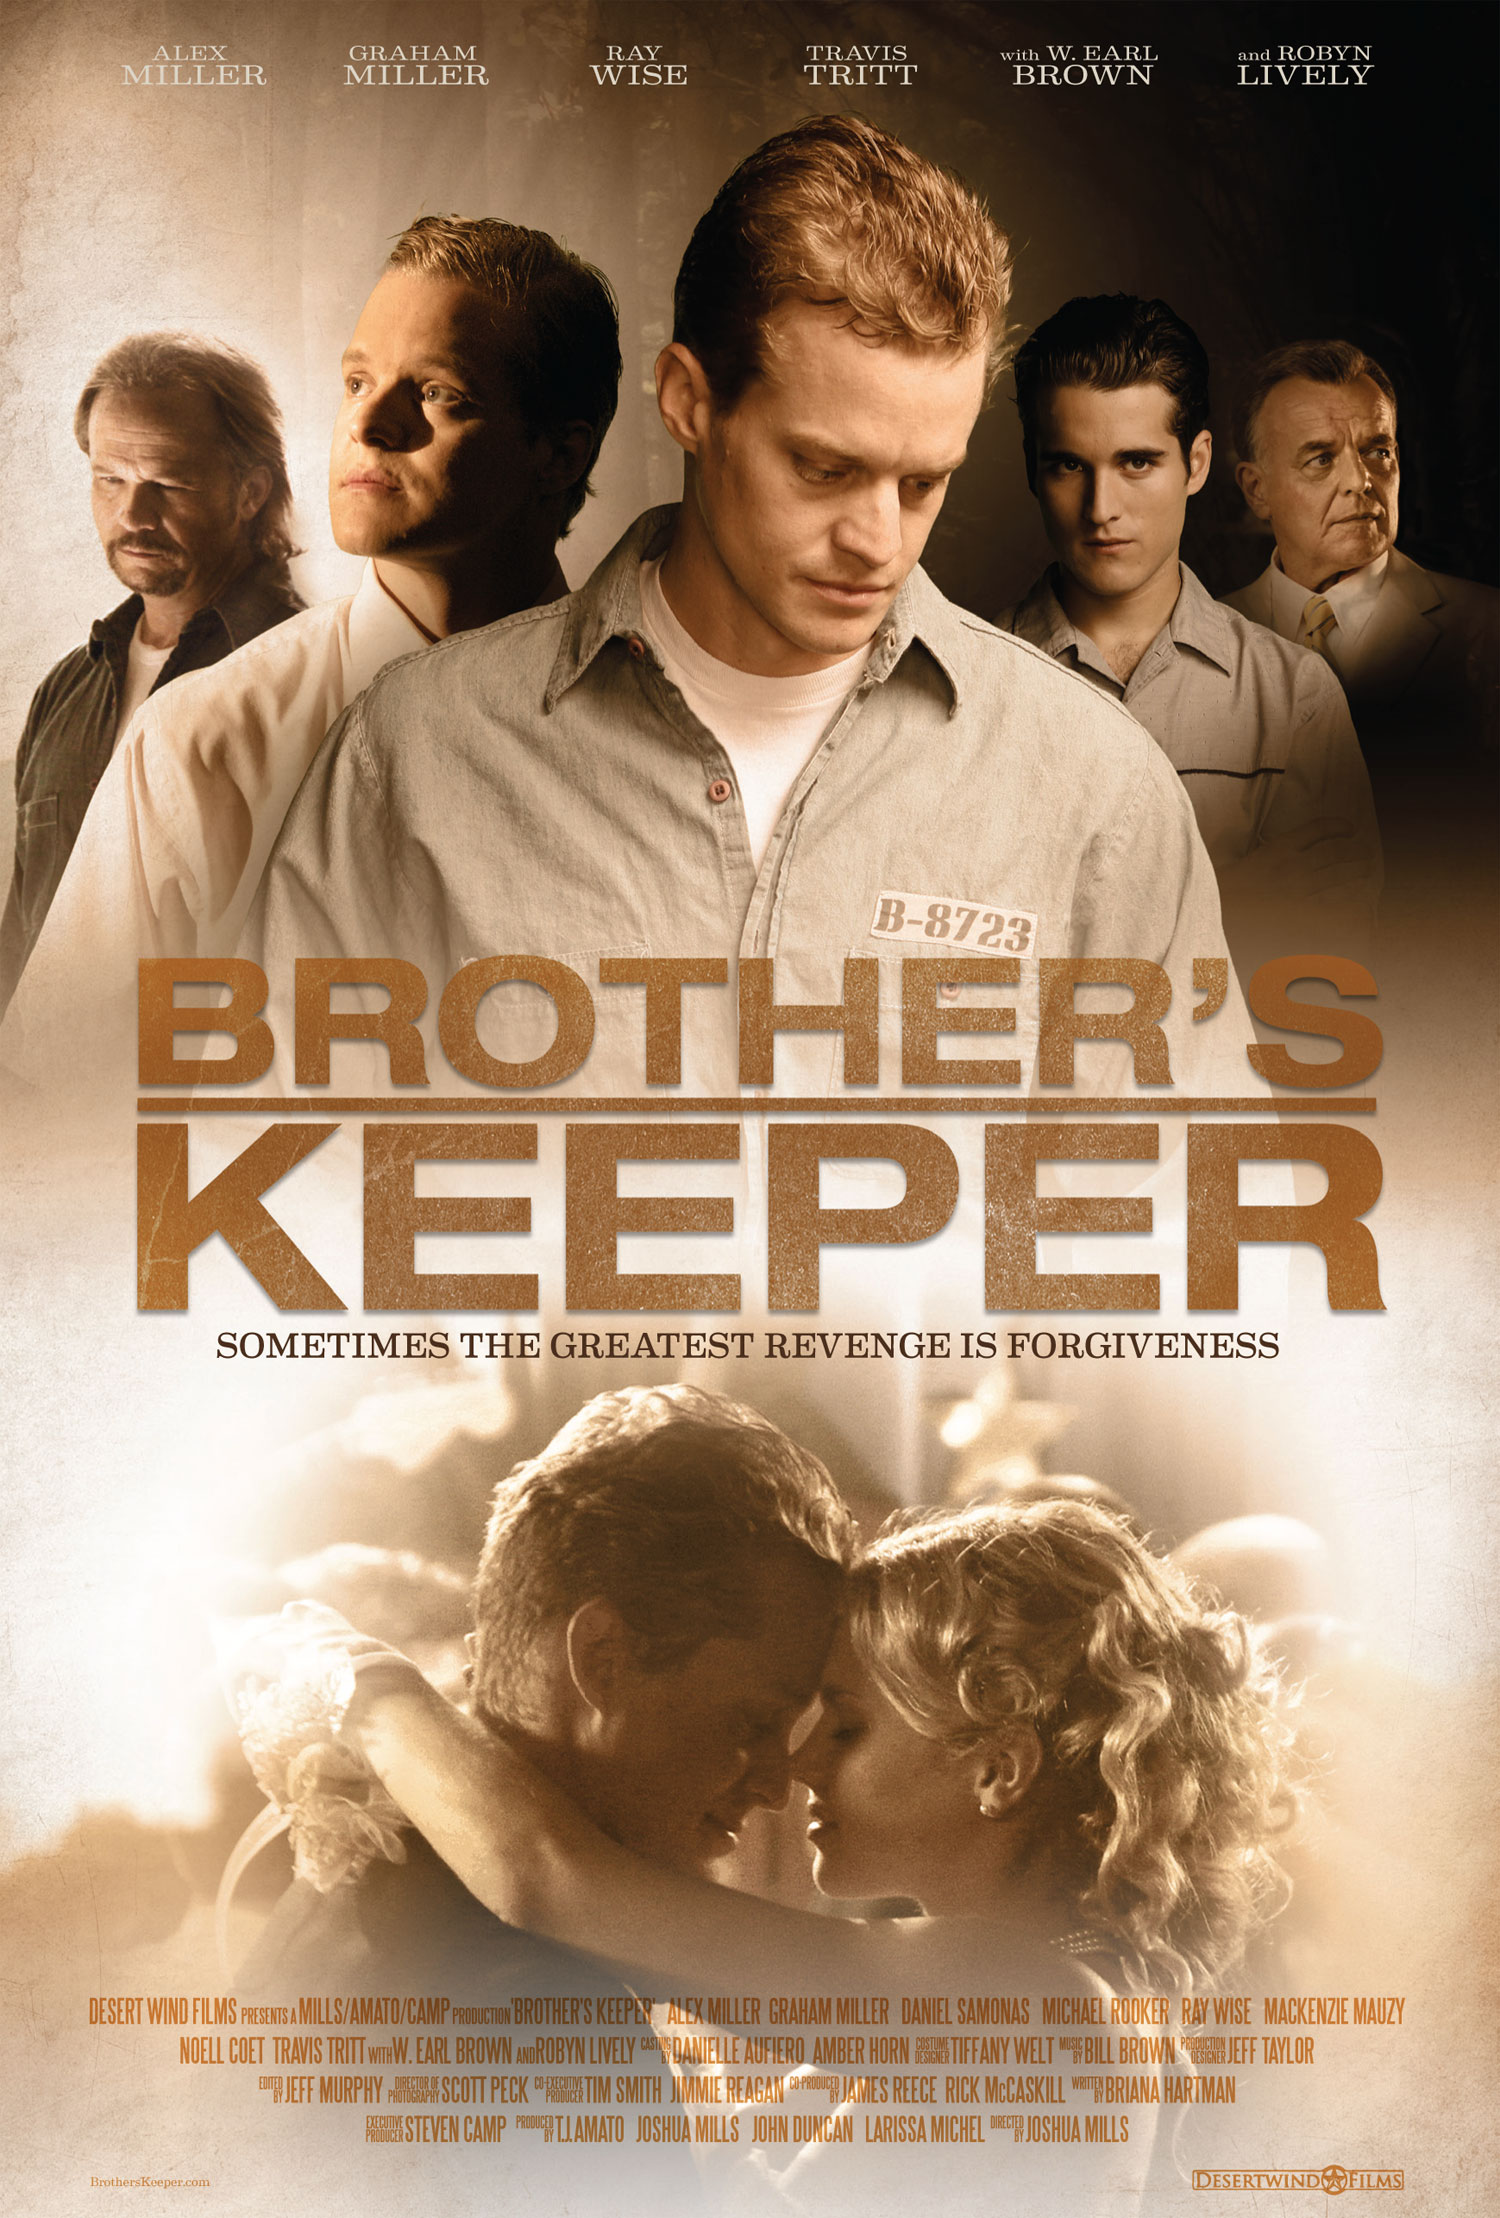 Desert Wind Launches Kickstarter Campaign for Brotherâ€™s Keeper Film